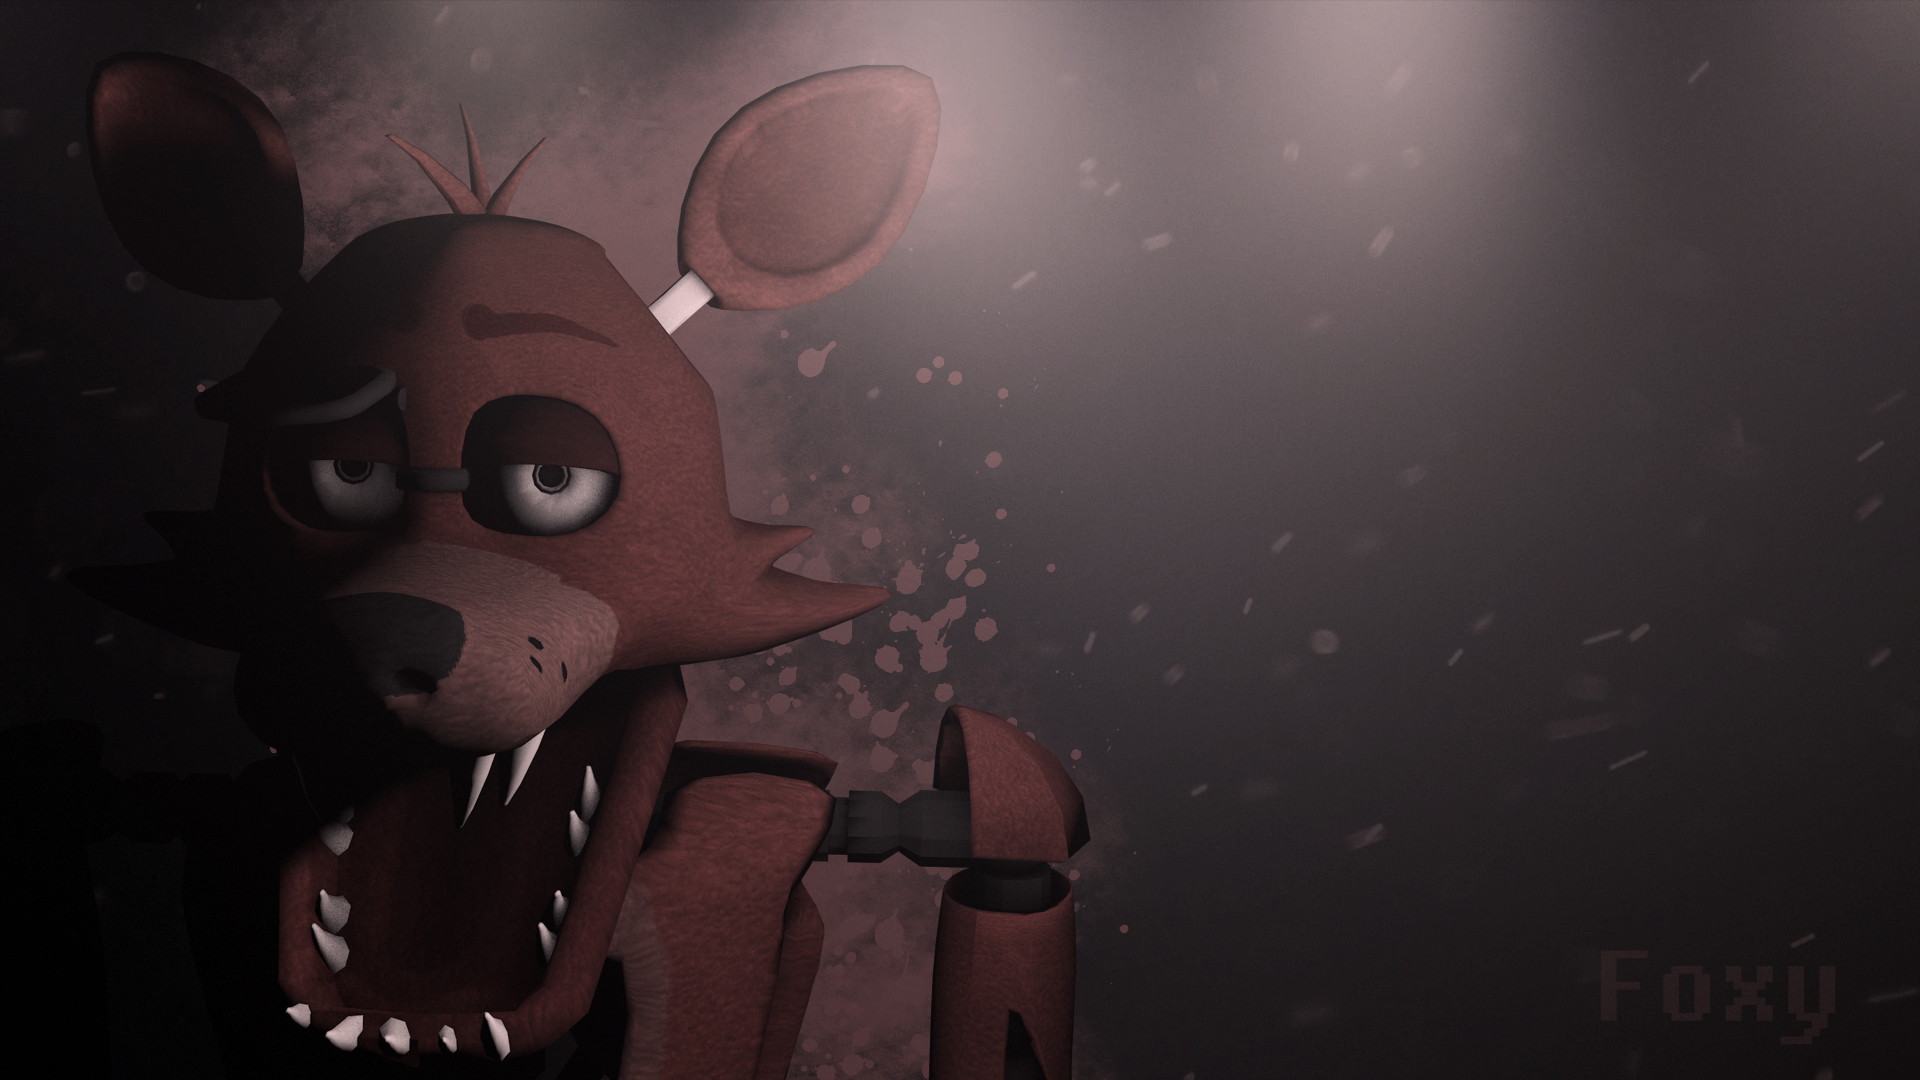 Five nights at Freddy's 4 wallpaper by xSass-Queen-Alleyx on